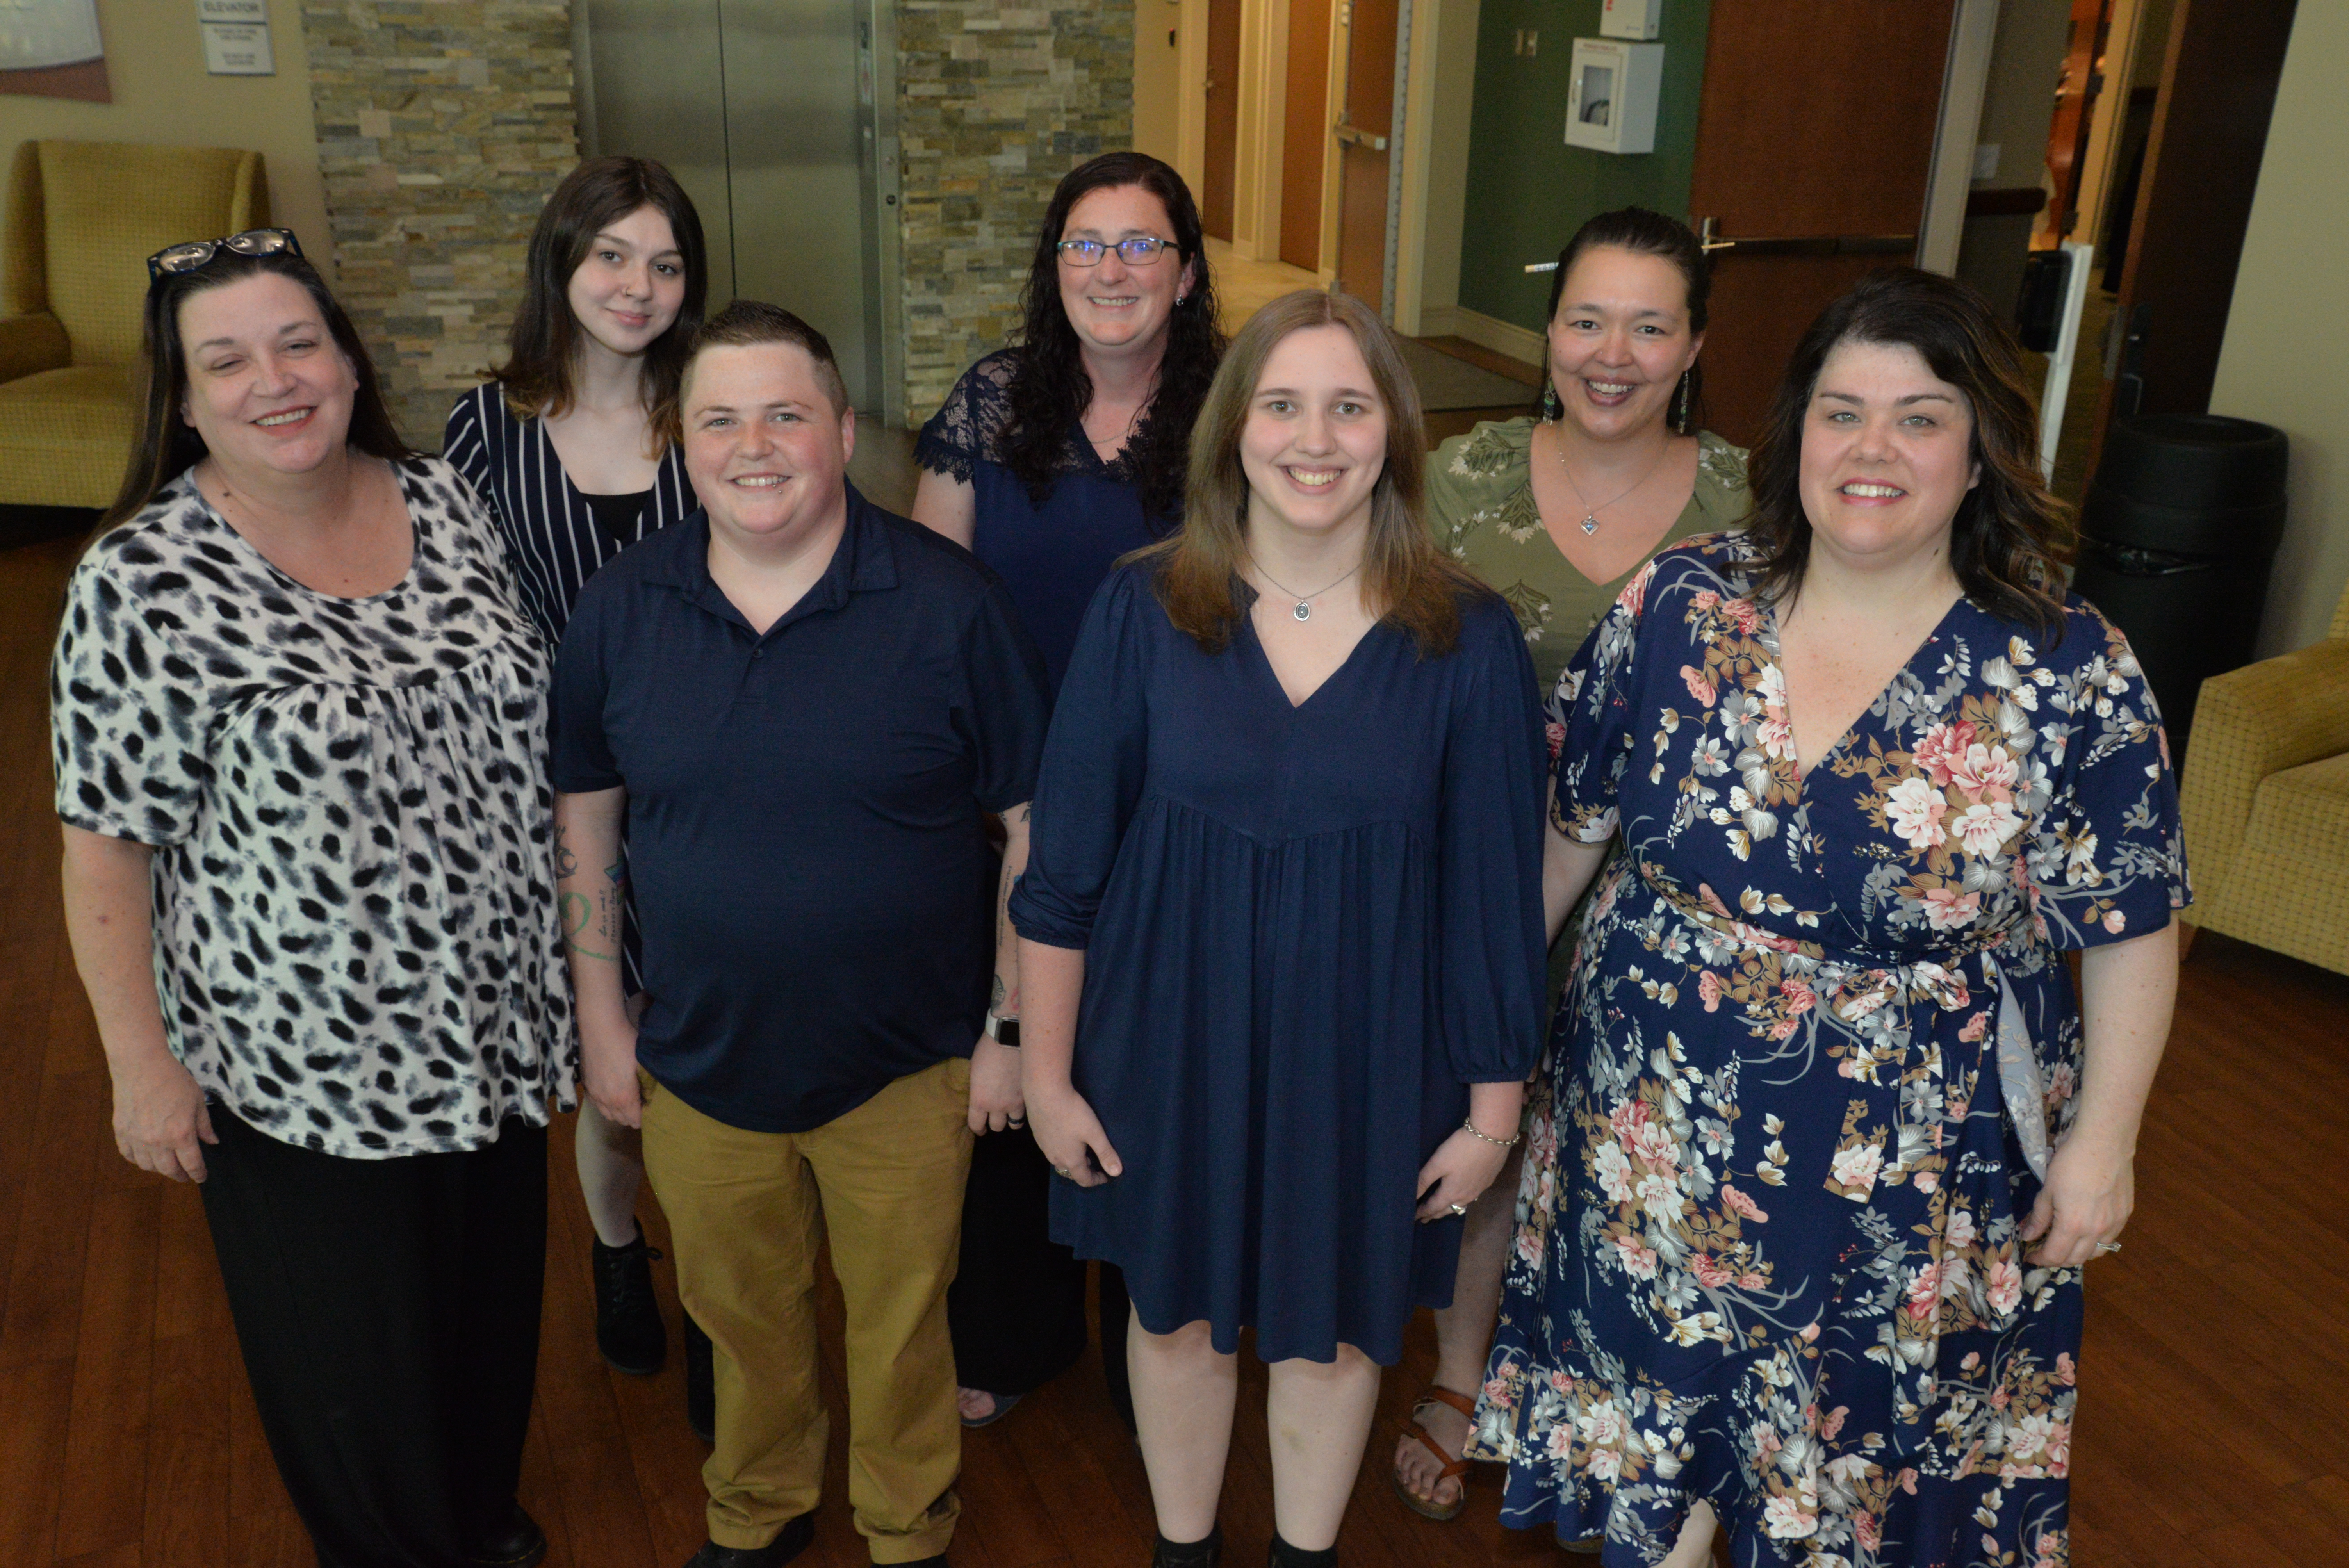 Crystal Rhynes (left), SCC’s Human Services Technology Program Coordinator, is pictured here with graduates, from left: Danielle Hutchinson of Sylva, Brittany Martin of Sylva, Kayla Loftis of Sylva, Jordan Shuler of Whittier, Amanda Holmes of Cullowhee and Heather Mallard of Franklin. 